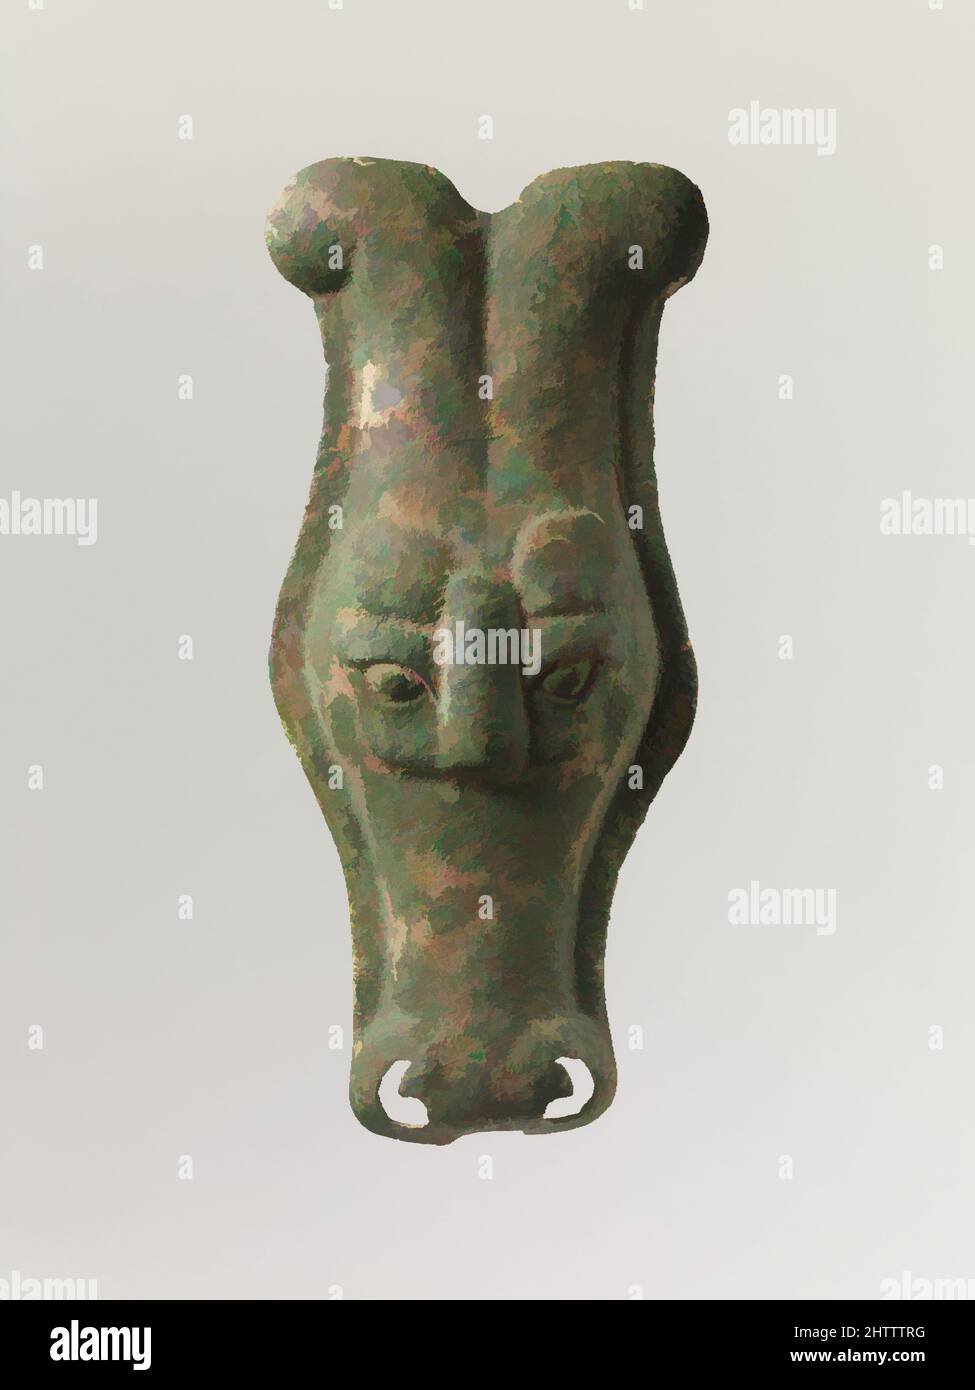 Art inspired by Horse Mask, mid-Western Zhou dynasty (1046–771 B.C.), China, Bronze, H. 8 1/4 in. (21 cm); W. 3 1/2 in. (8.9 cm), Metalwork, Classic works modernized by Artotop with a splash of modernity. Shapes, color and value, eye-catching visual impact on art. Emotions through freedom of artworks in a contemporary way. A timeless message pursuing a wildly creative new direction. Artists turning to the digital medium and creating the Artotop NFT Stock Photo